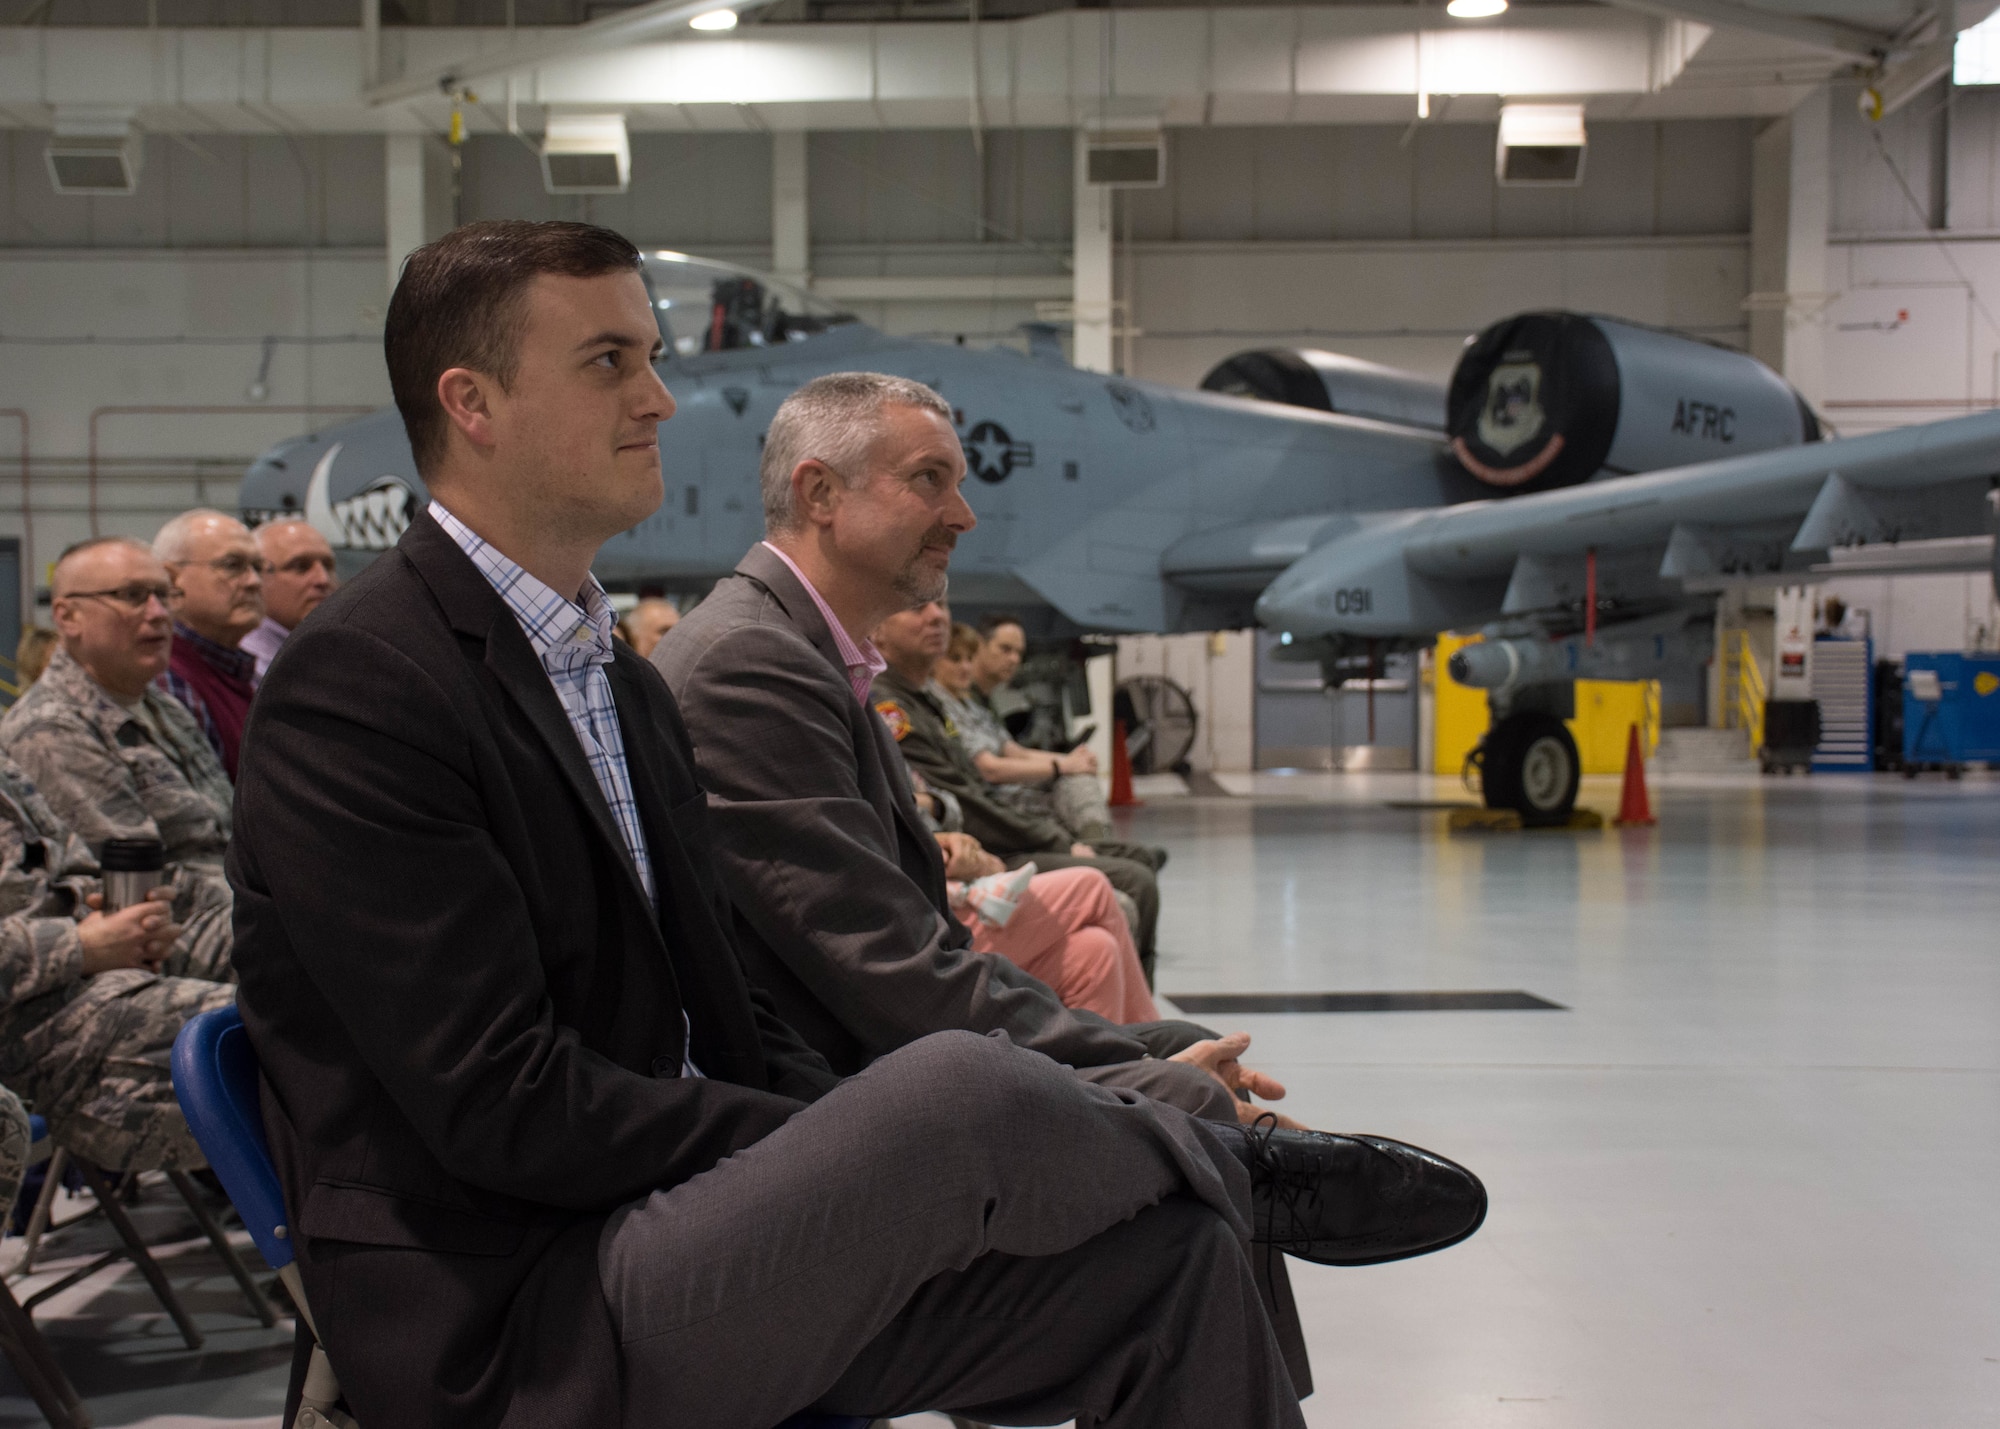 Mayor Taylor Elwell of Leeton, Mo., and BCC President Karl Kramer watch the commander's call from seats in front of an A-10 Thunderbolt II attack aircraft.